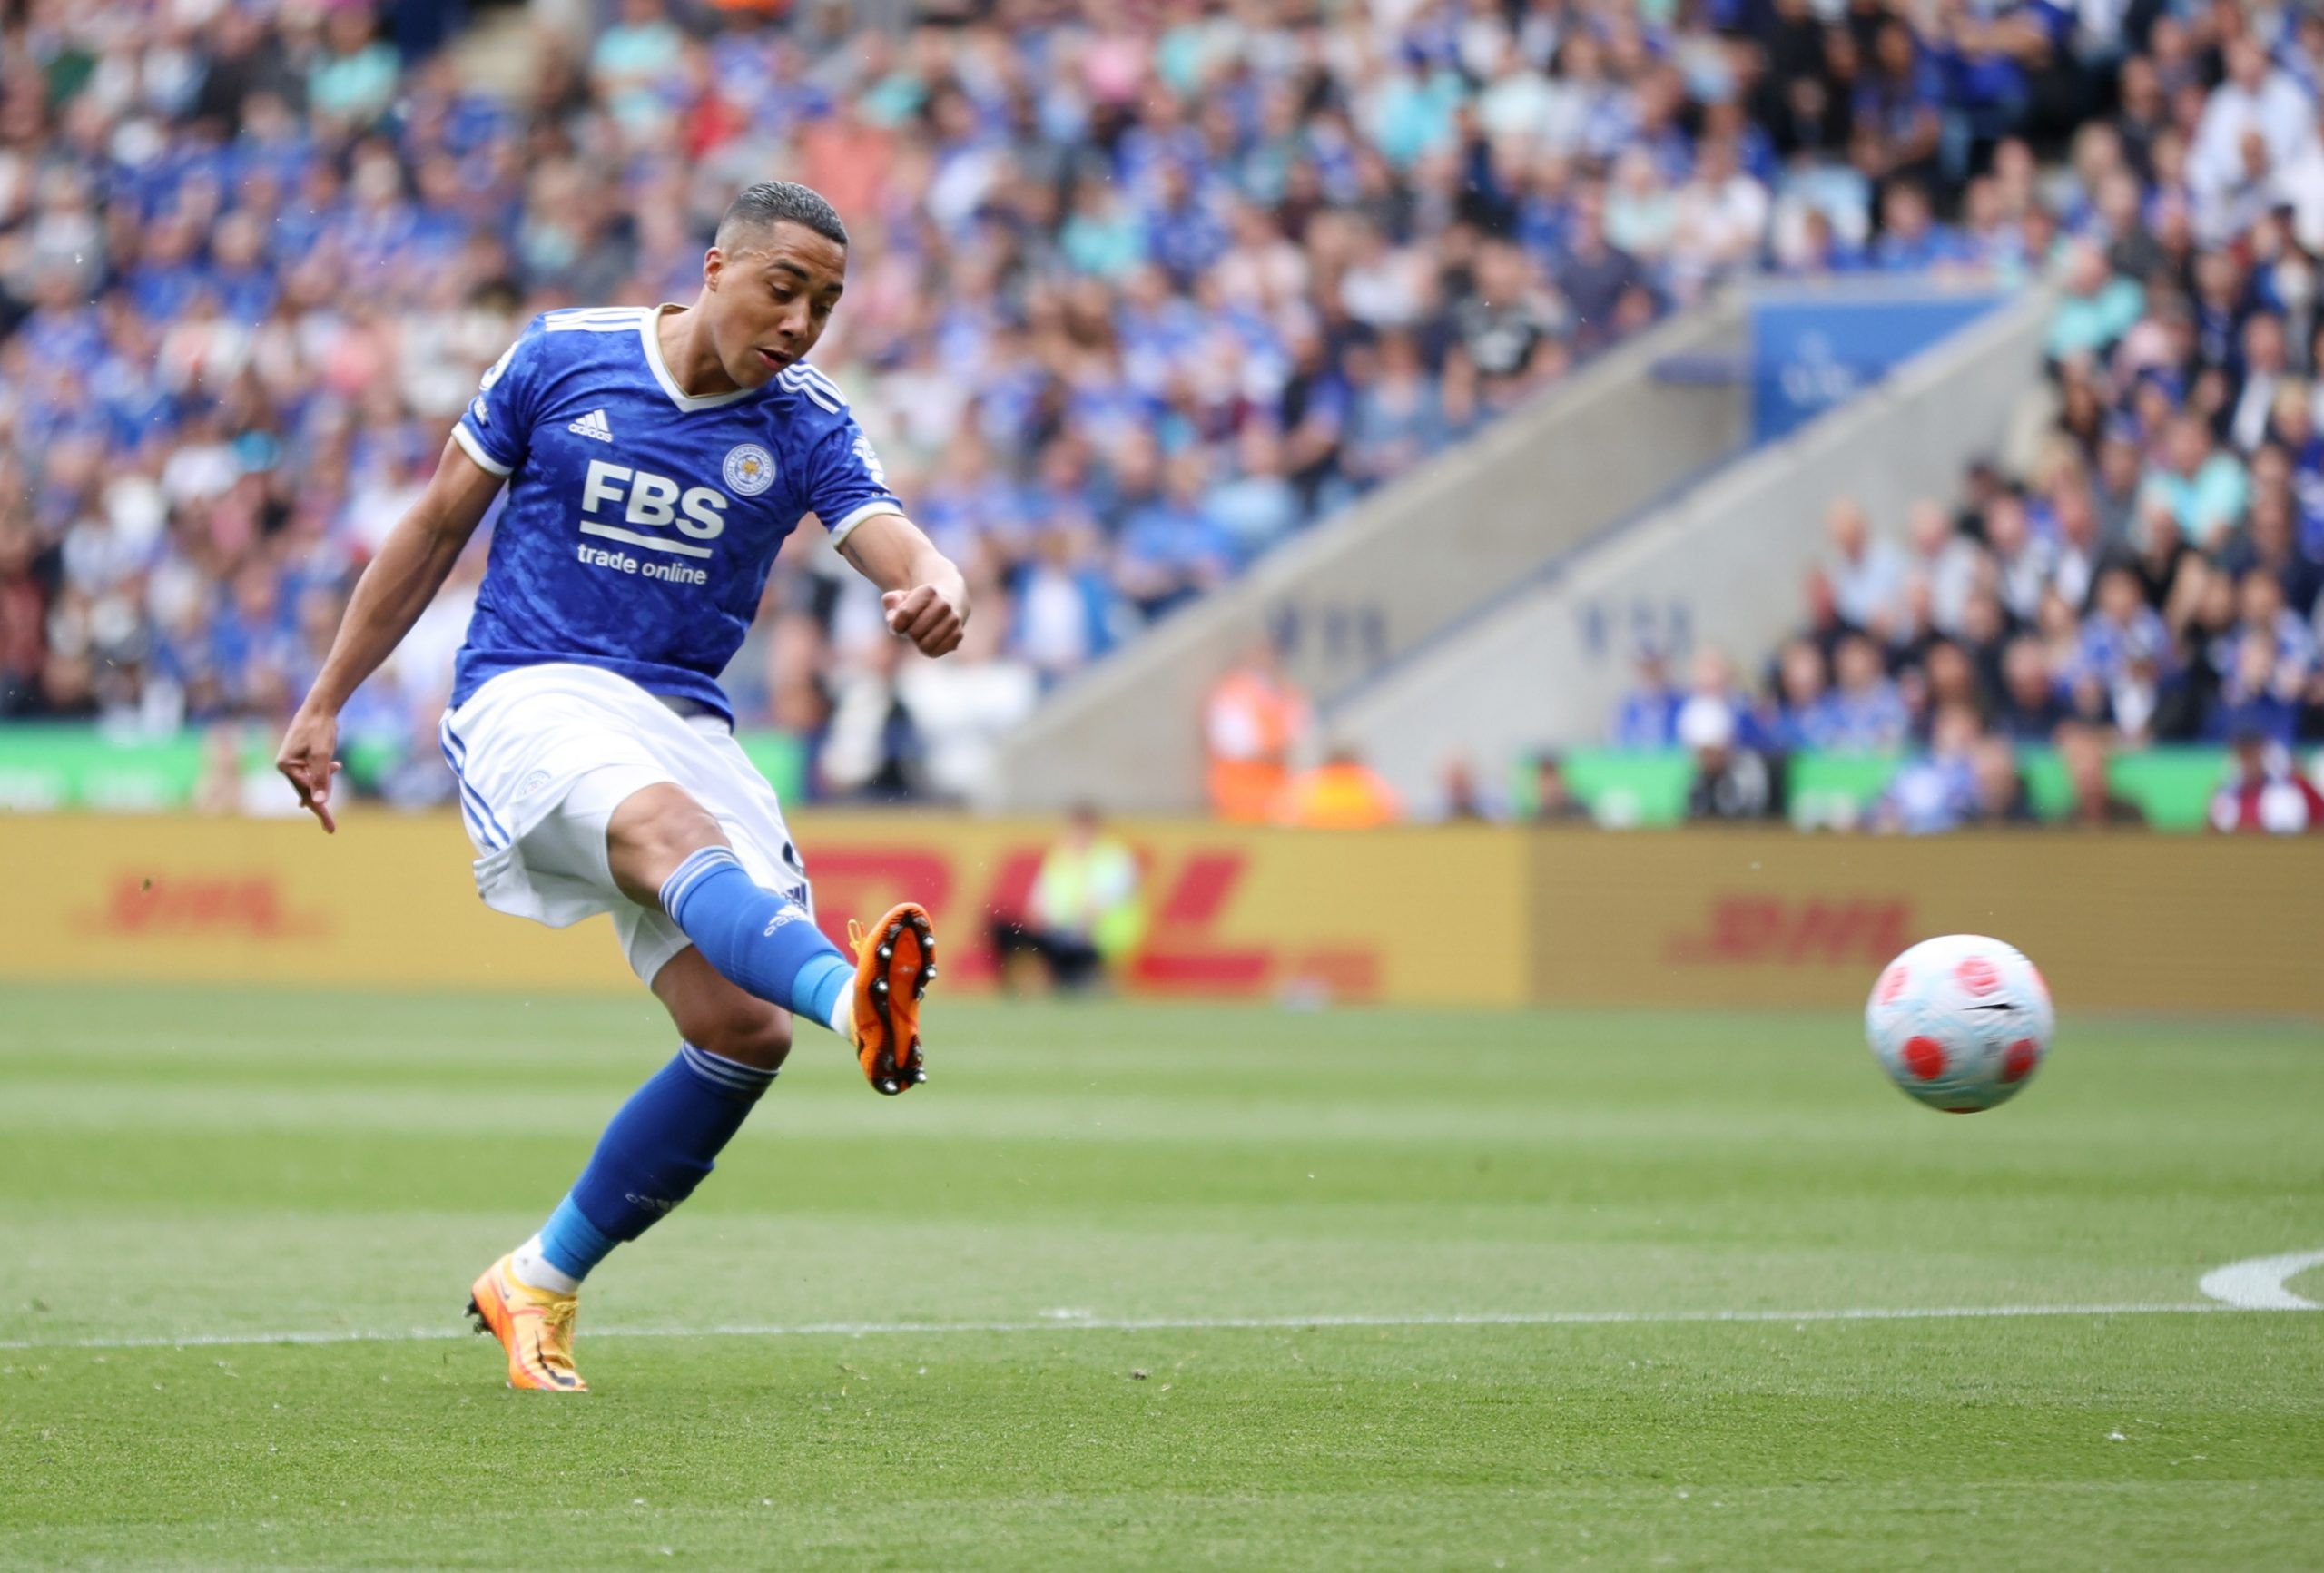 Soccer Football - Premier League - Leicester City v Southampton - King Power Stadium, Leicester, Britain - May 22, 2022 Leicester City's Youri Tielemans in action Action Images via Reuters/Molly Darlington EDITORIAL USE ONLY. No use with unauthorized audio, video, data, fixture lists, club/league logos or 'live' services. Online in-match use limited to 75 images, no video emulation. No use in betting, games or single club /league/player publications.  Please contact your account representative f